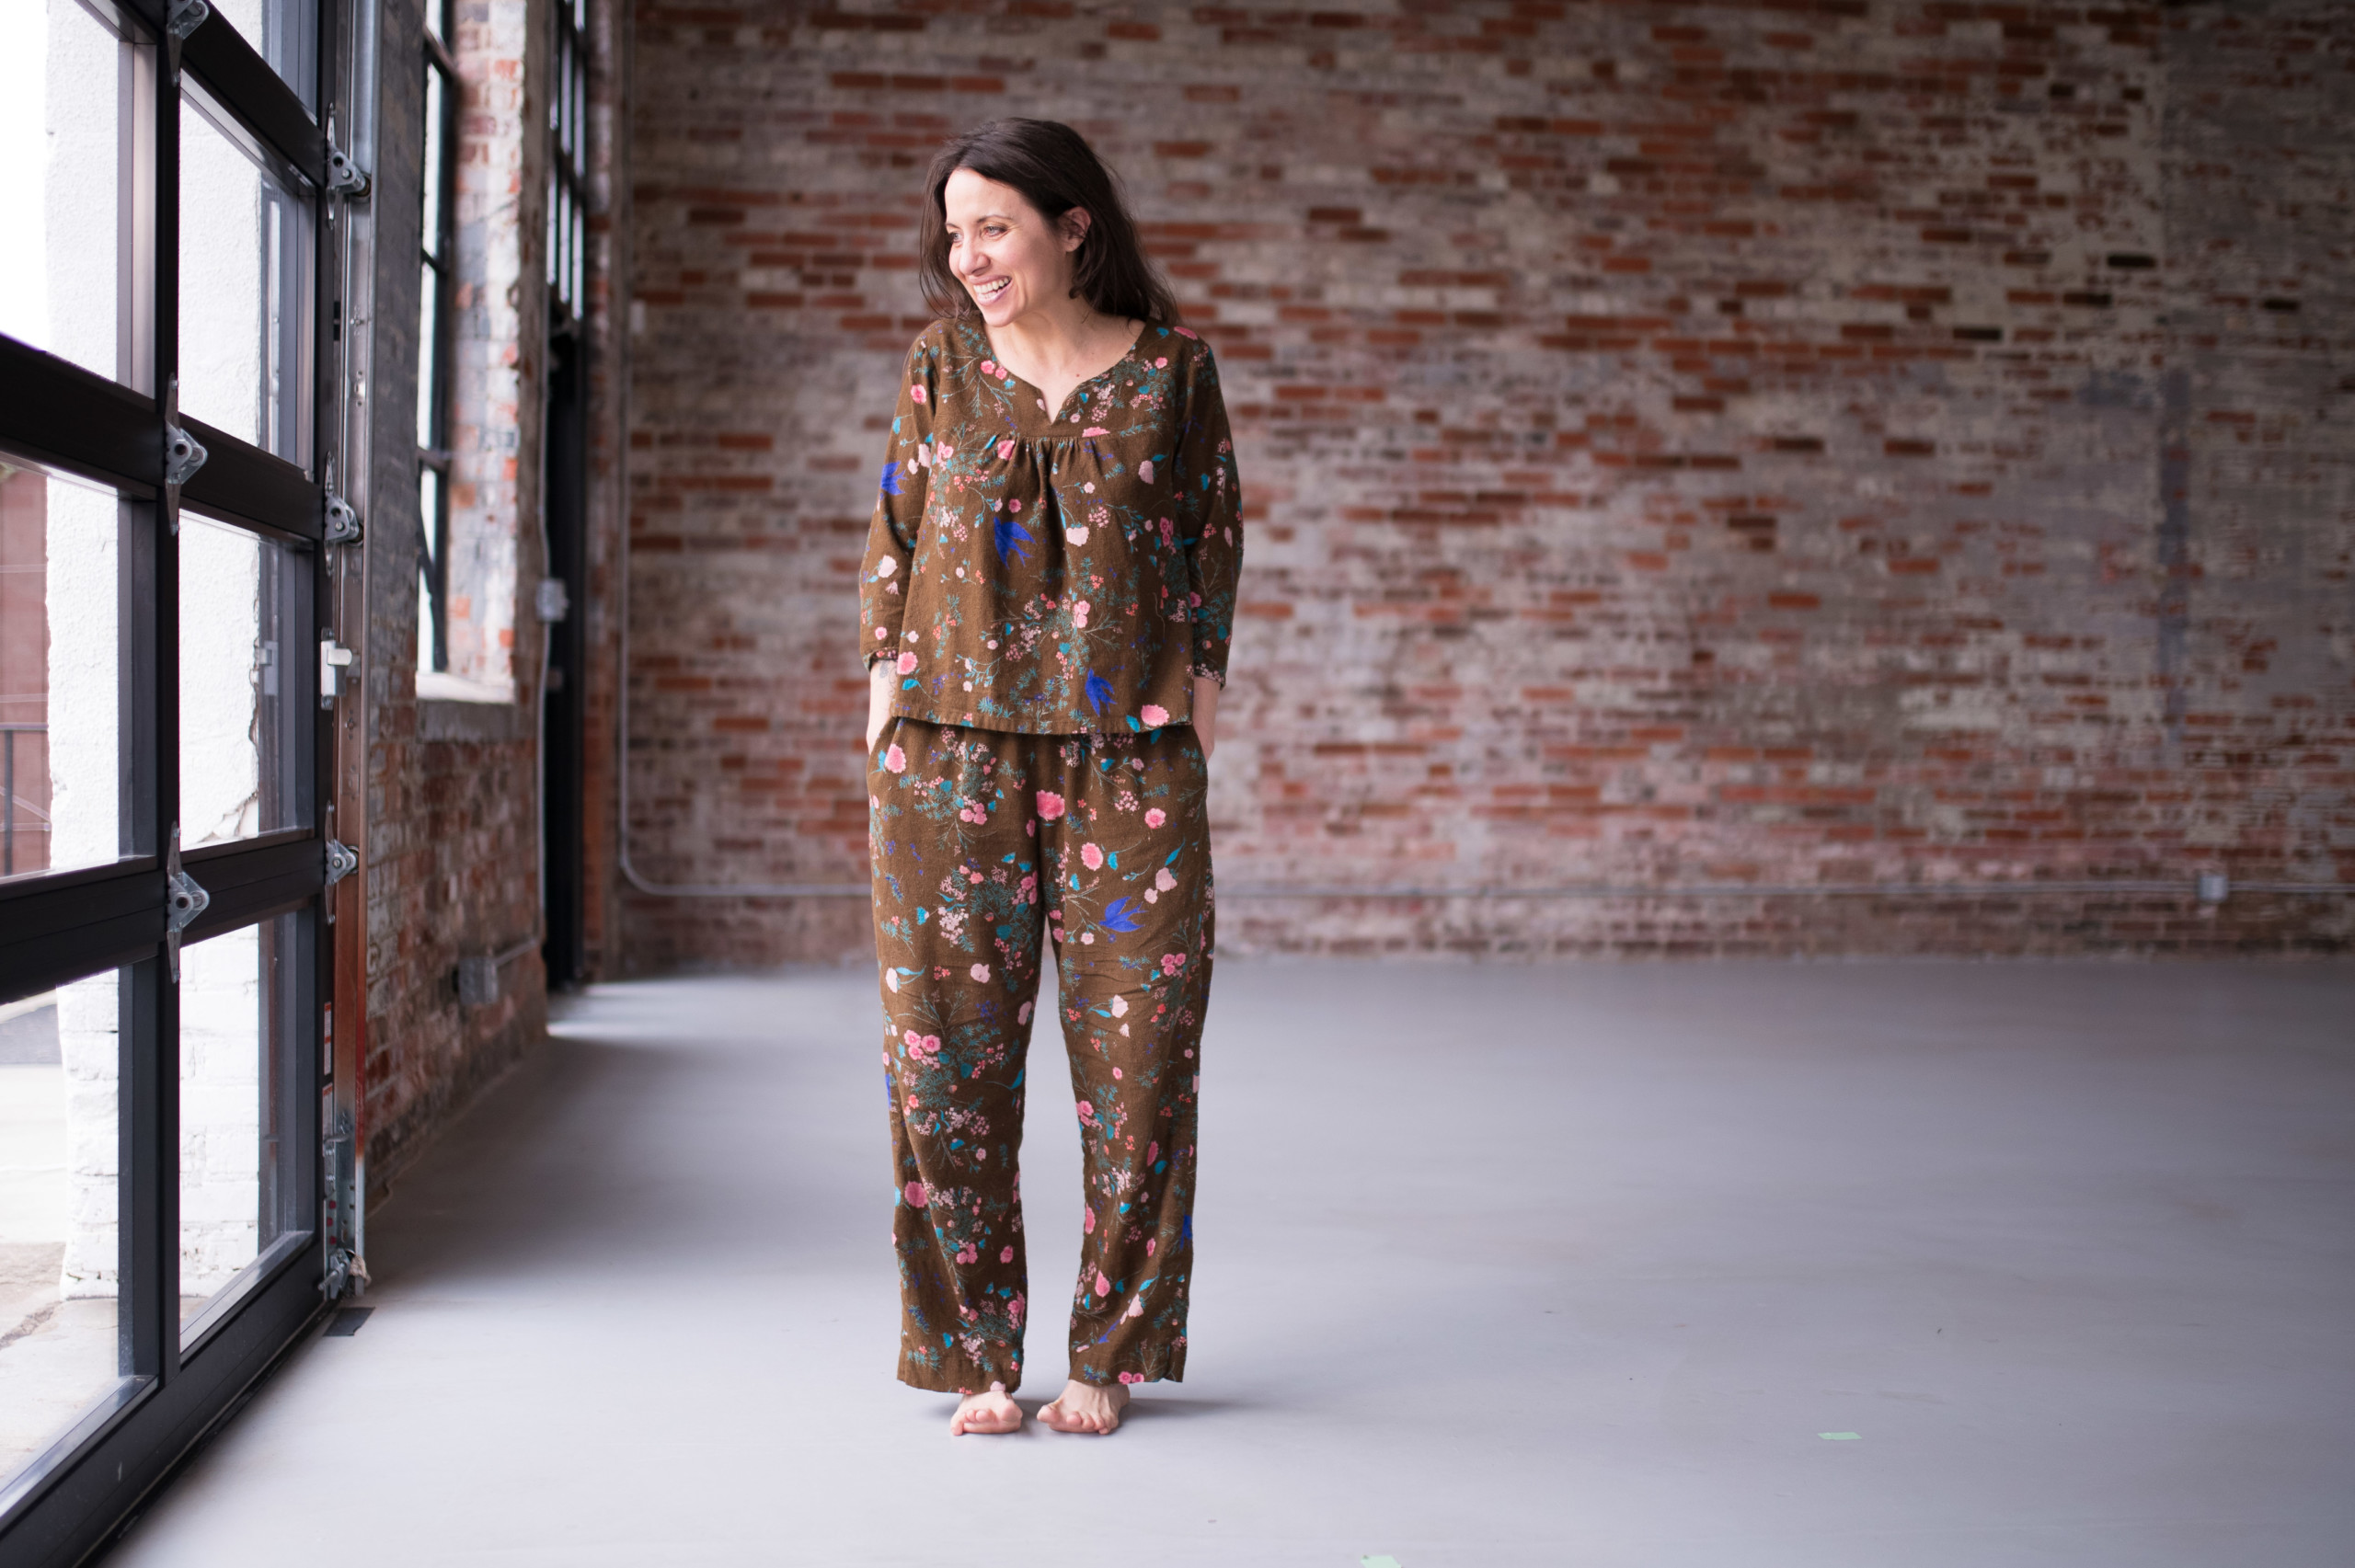 Meg is wearing brown floral, flannel Nocturne Pajamas in front of a brick wall.